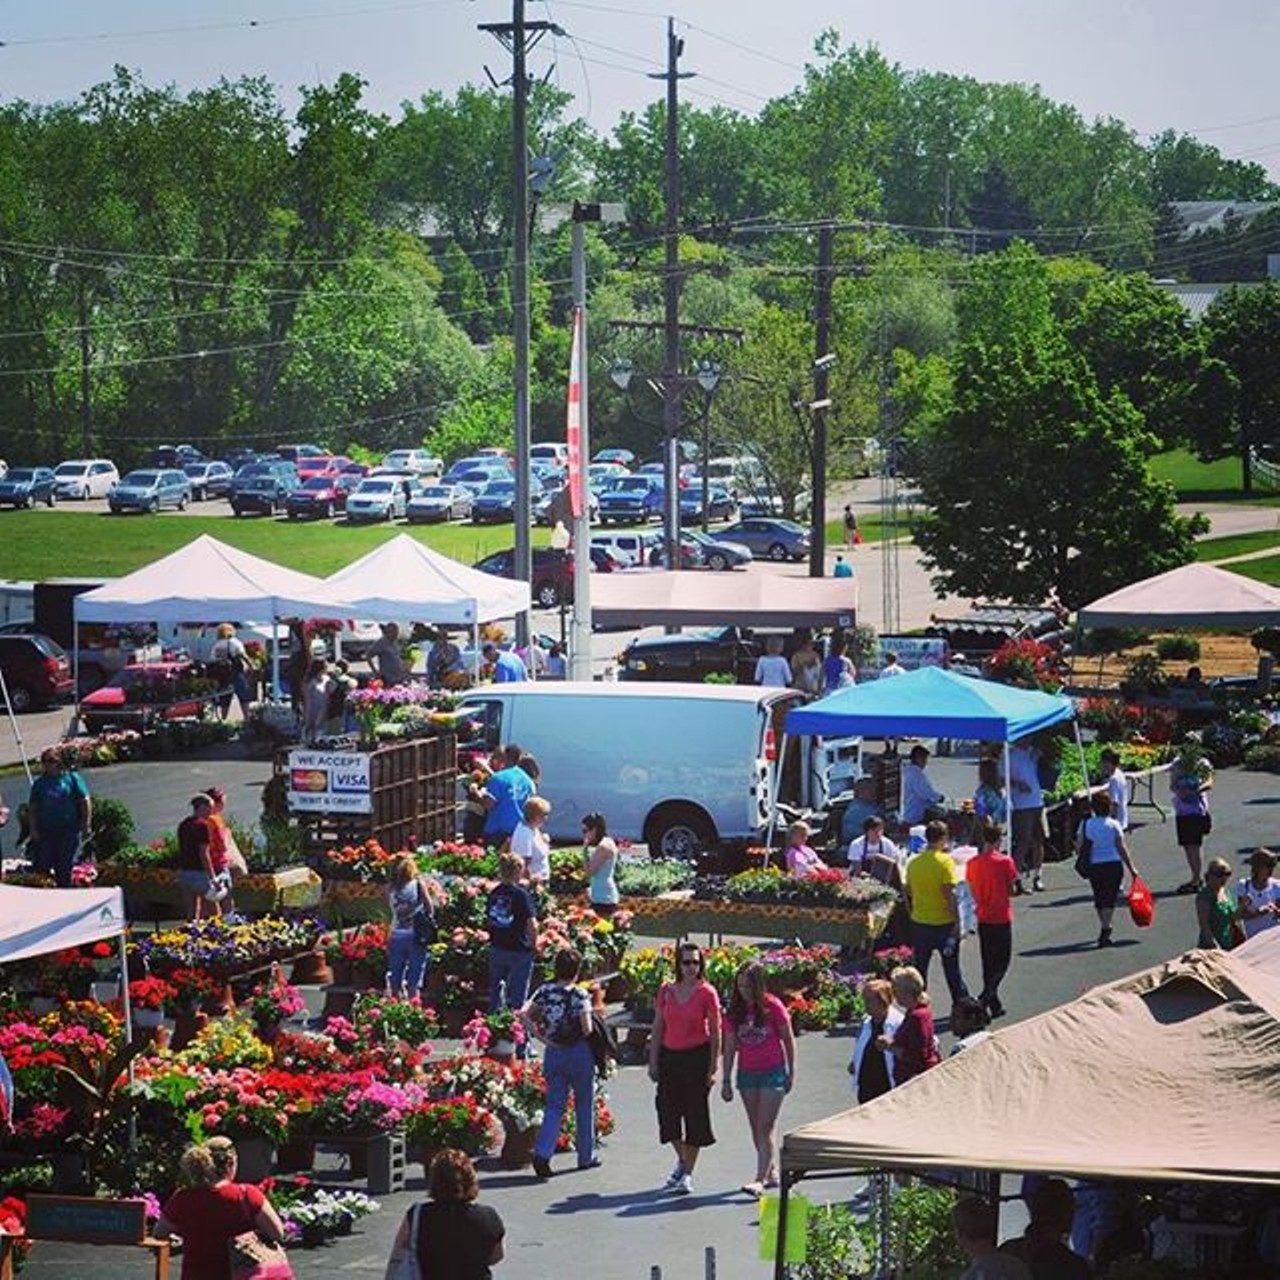 Downtown Rochester Farmers Market
Rochester, MI
Features Michigan-exclusive produce including flowers baked goods and honey, maple syrup and organic products. It&#146;s open every Sunday 8am-1pm on May 7- October 29.
Photo via Instagram: Downtown Rochester Farmers Market